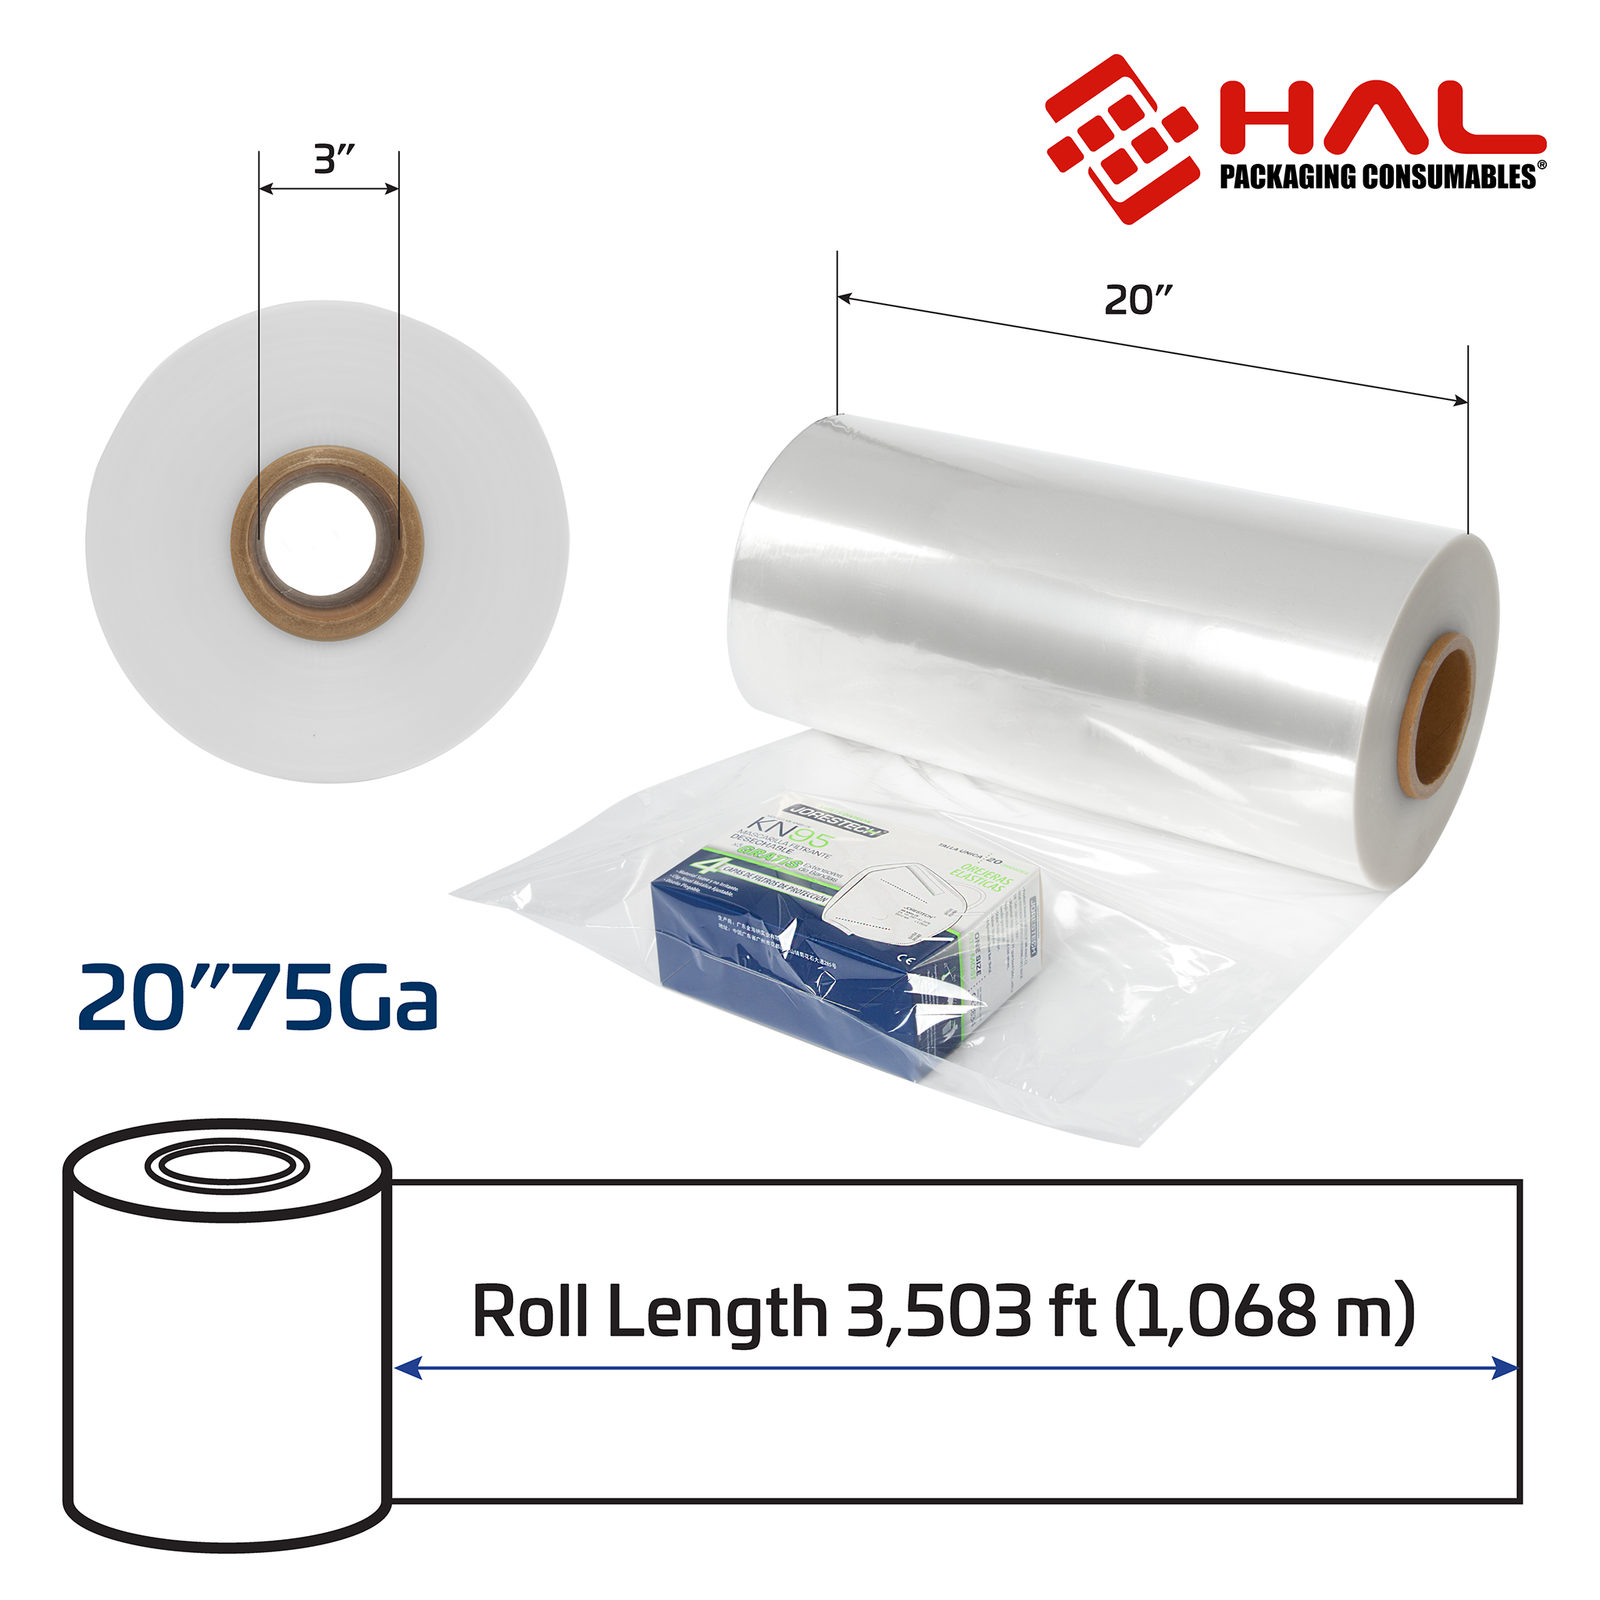 Measurements of the 75 gauge shrink wrapping film tube. 3 inch diameter of the inner core, and 20 inch width with a 3,503 ft. length (1,068 meters).